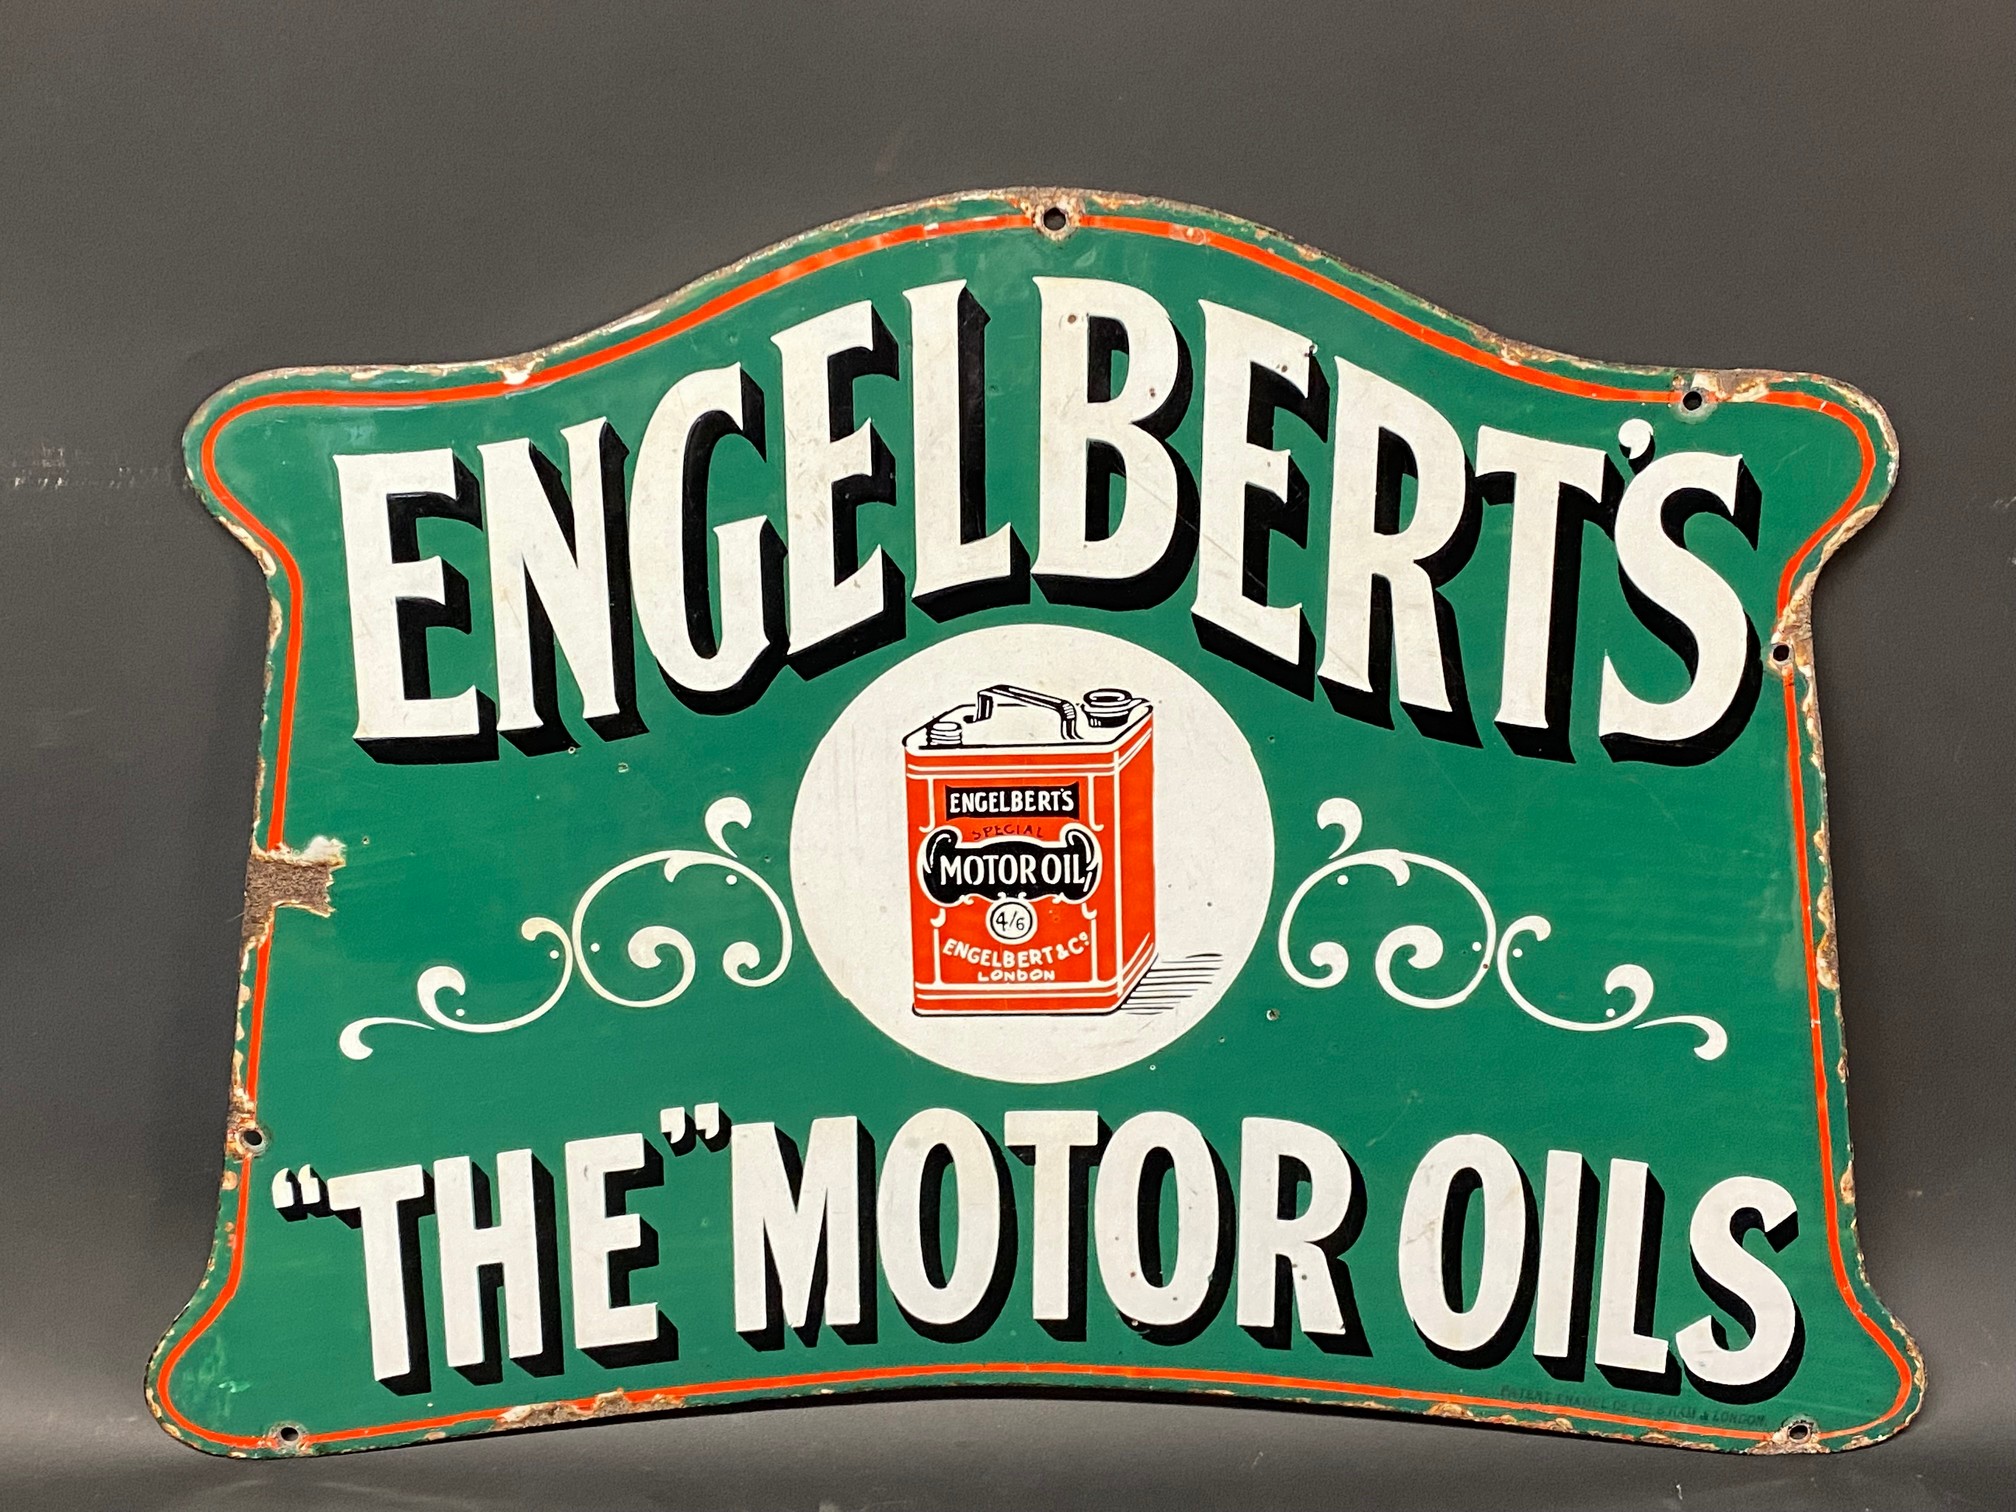 A very rare Engelbert's 'The' Motor Oils shaped double sided enamel sign with an image of a can to